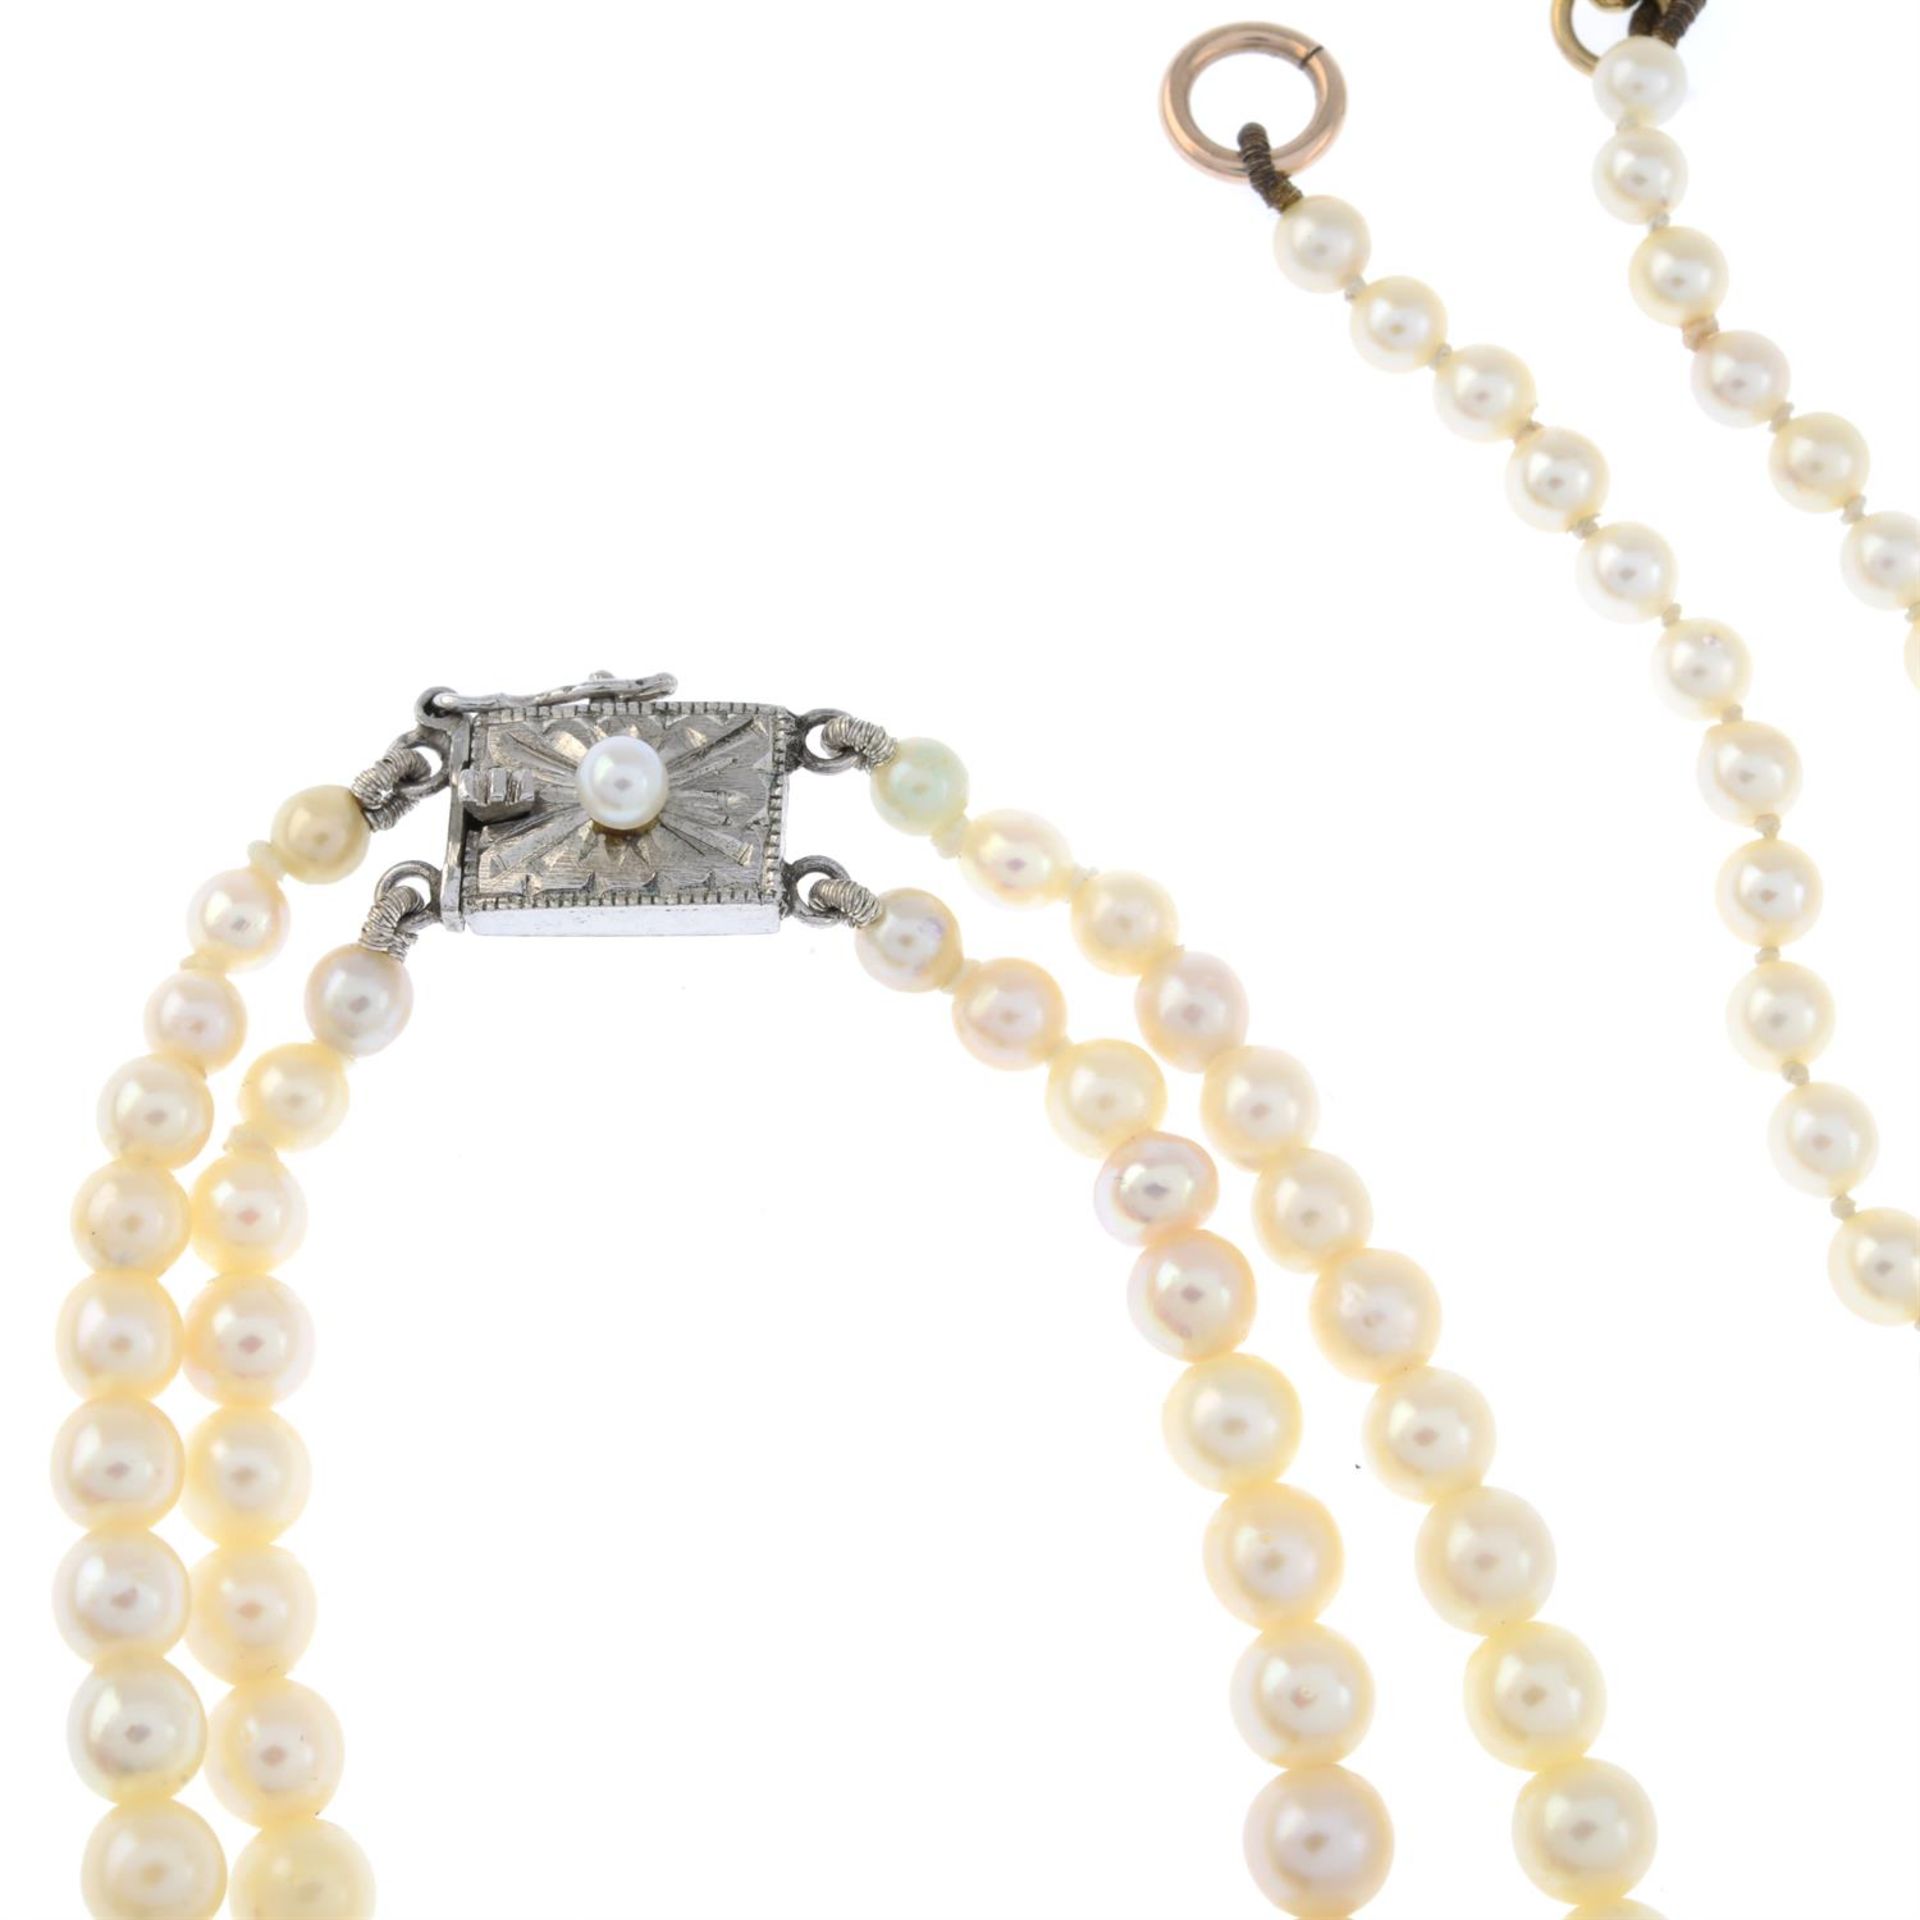 Two cultured pearl necklaces - Image 2 of 2